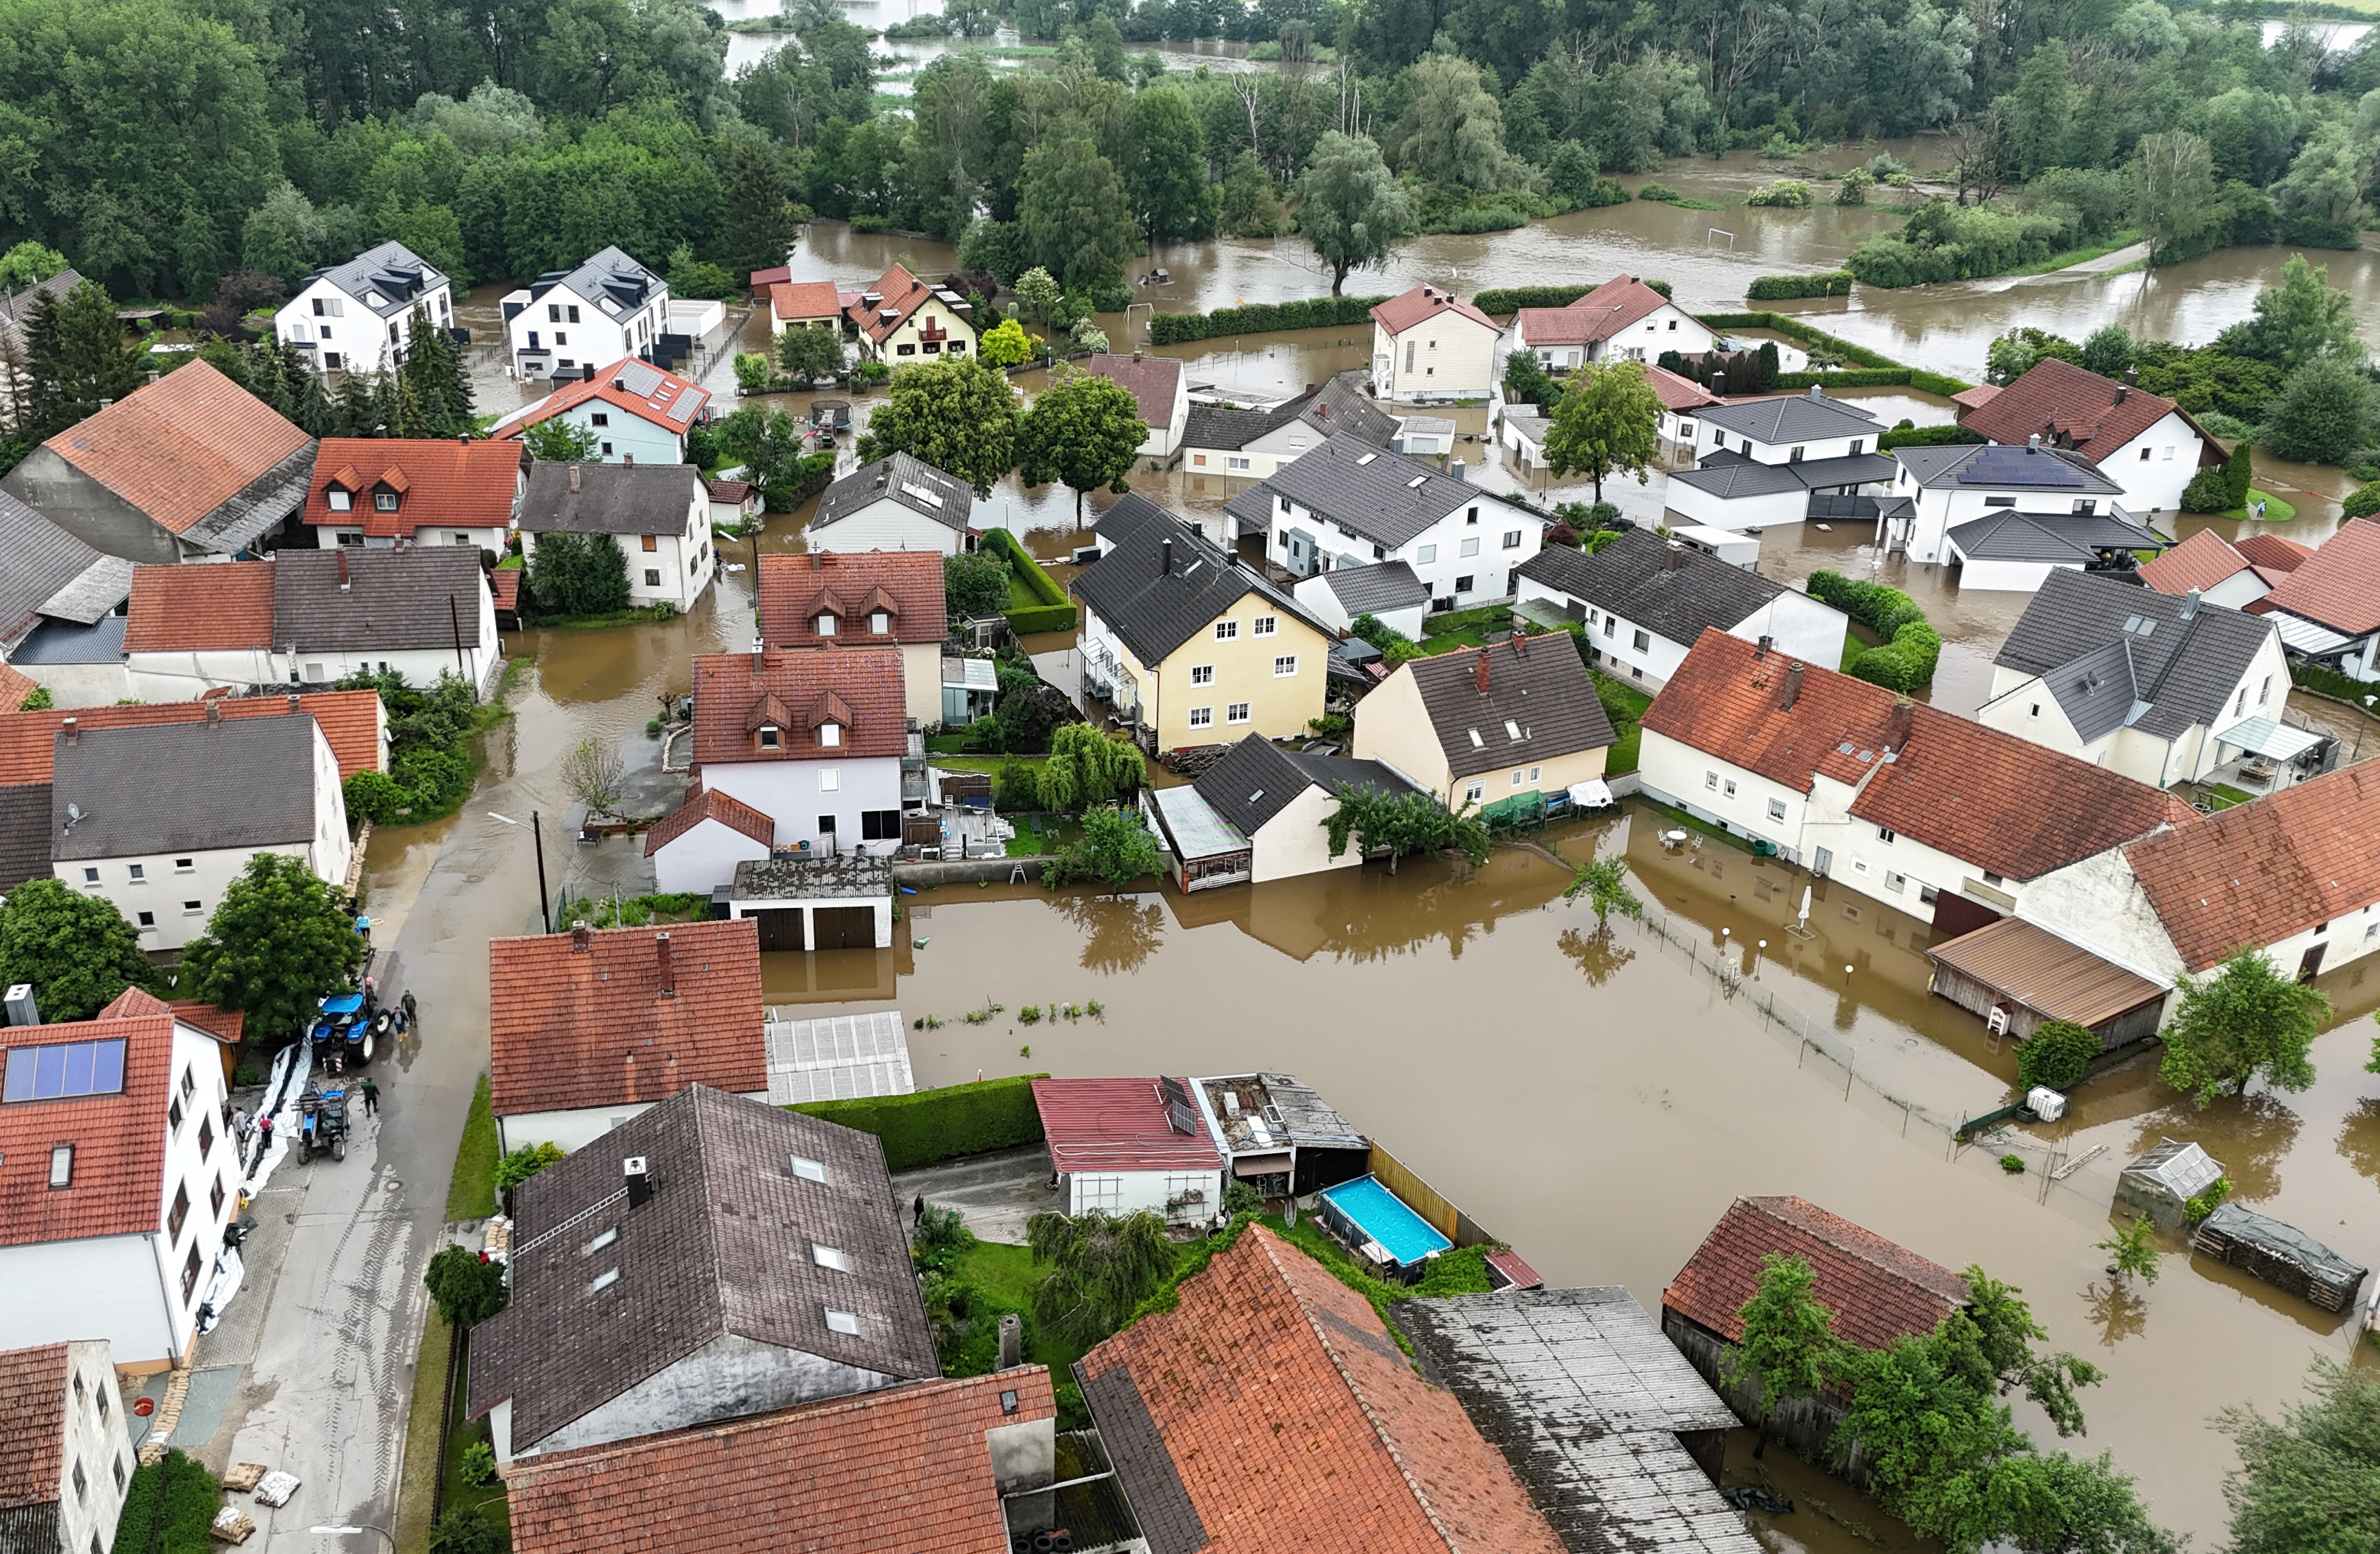 High water levels and heavy rainfalls in Bavaria